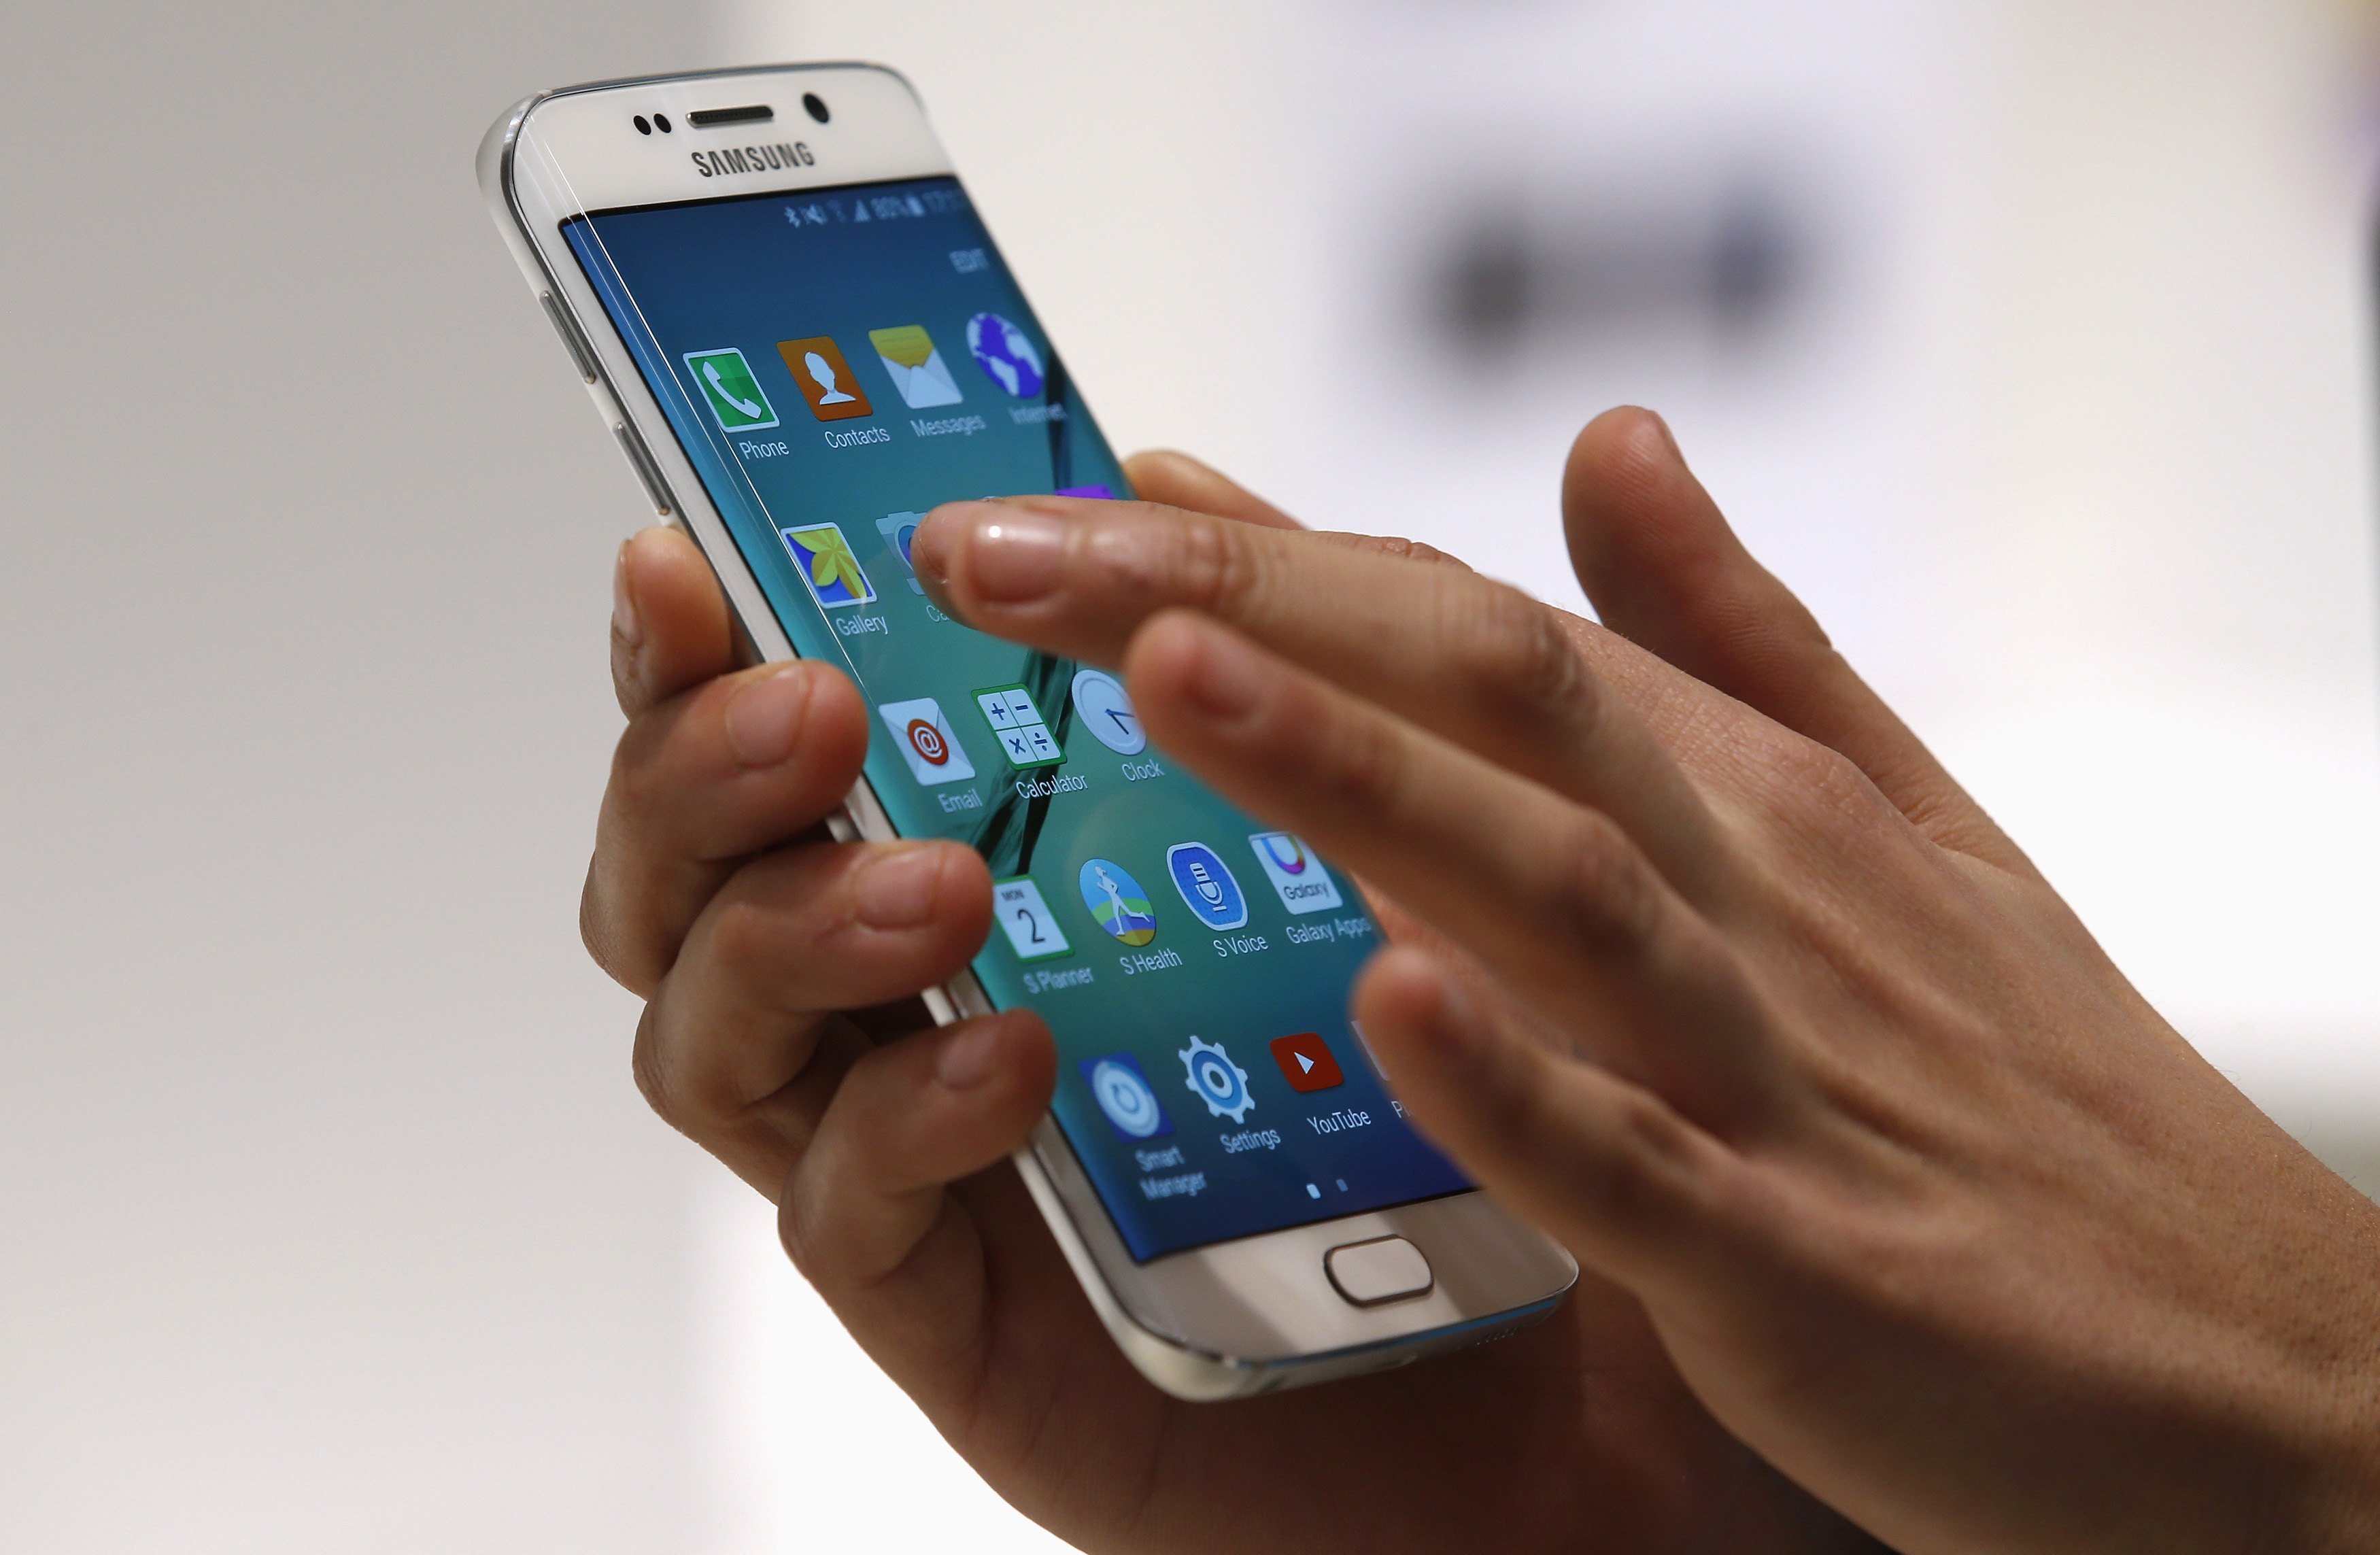 The Samsung Galaxy S6, unveiled in Barcelona this month, will feature wireless charging capabilities. Photo: Reuters